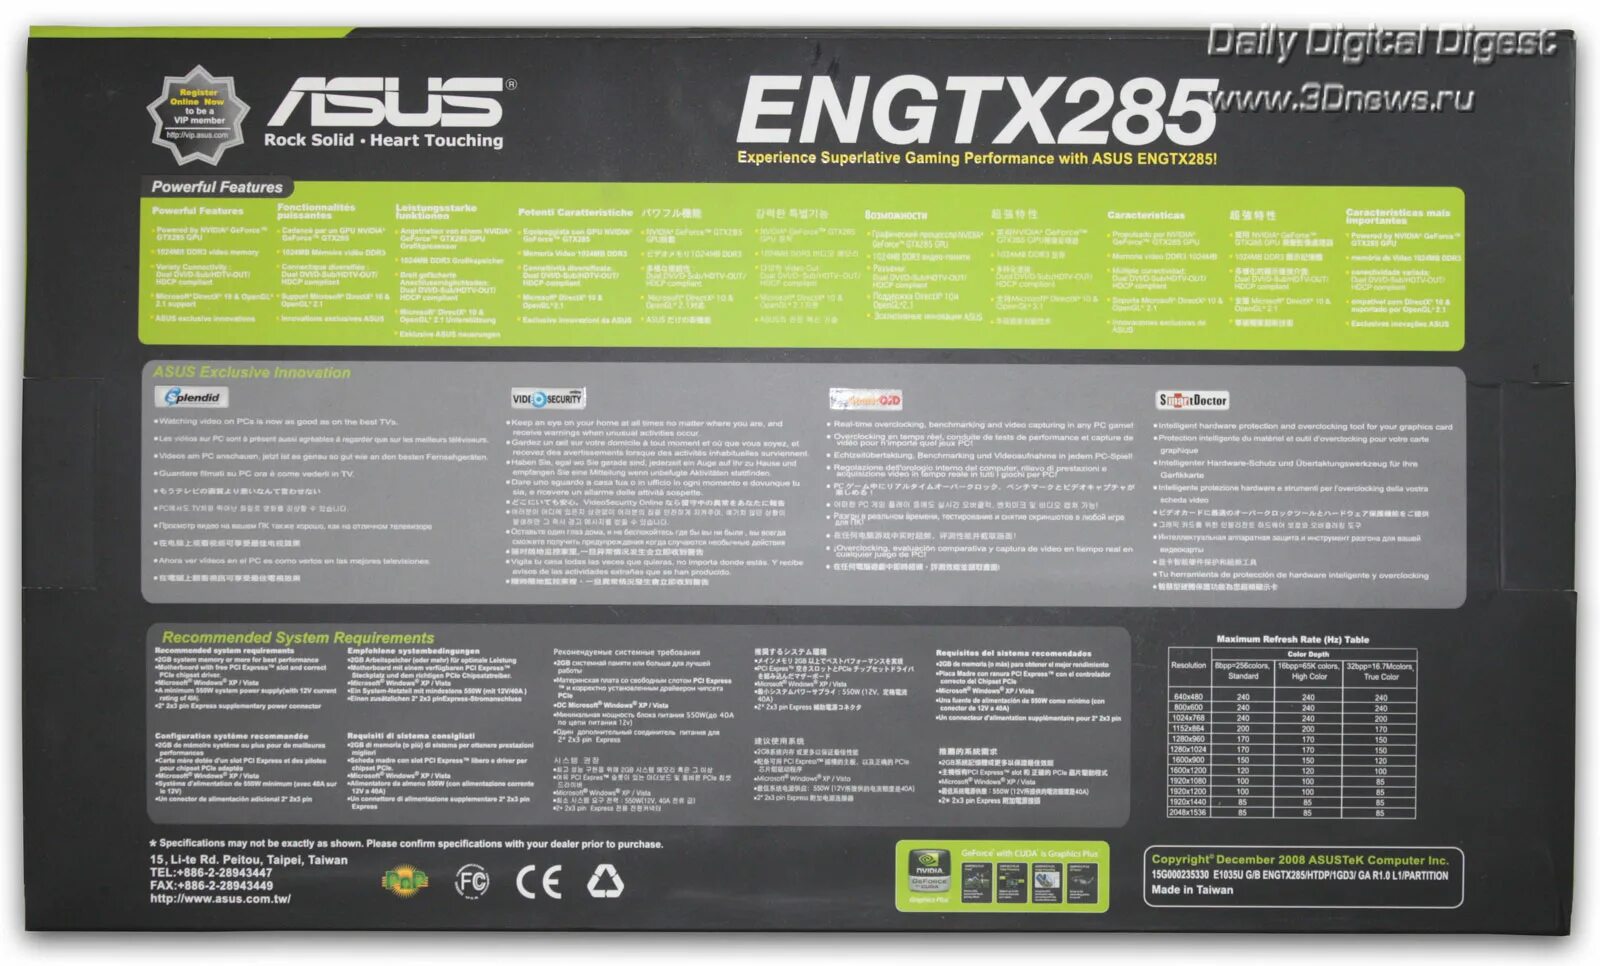 Power features. ASUS engtx275. ASUS Rock Solid Heart touching видеокарта. Инструкция на видеокарту ASUS engtx285. ASUS Rock Solid Heart touching видеокарта описание.